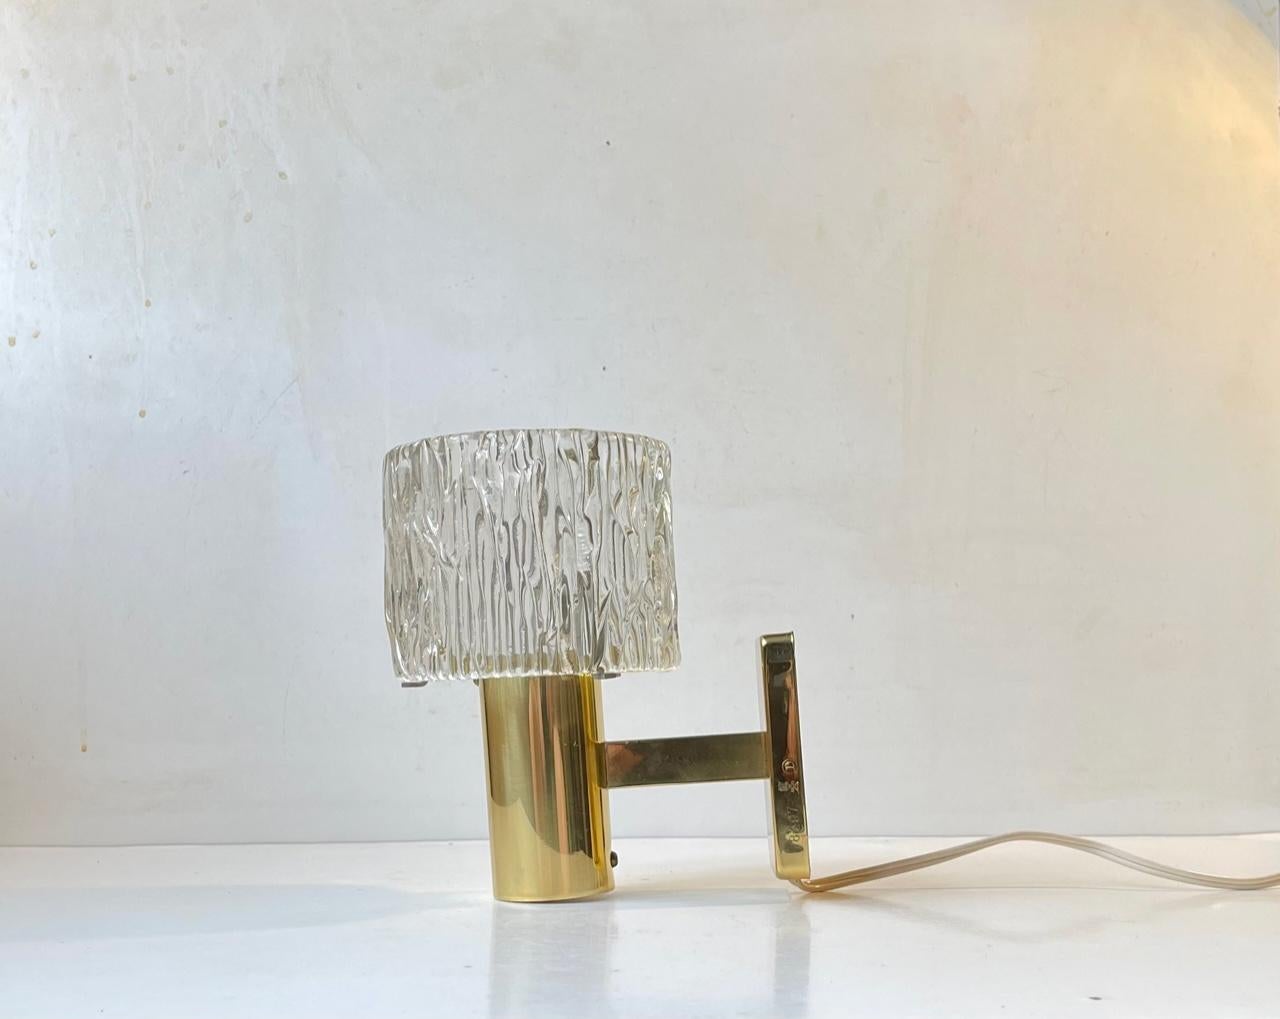 A stylish midcentury Hotel style wall light in gilt brass and textured crystal. Often falsely attributed Hans Agne Jakobsson but actually made by HAGS in Austria during the late 1950s or early 60s. Measurements: H: 19 cm, Diameter: 12 cm, Dept: 17